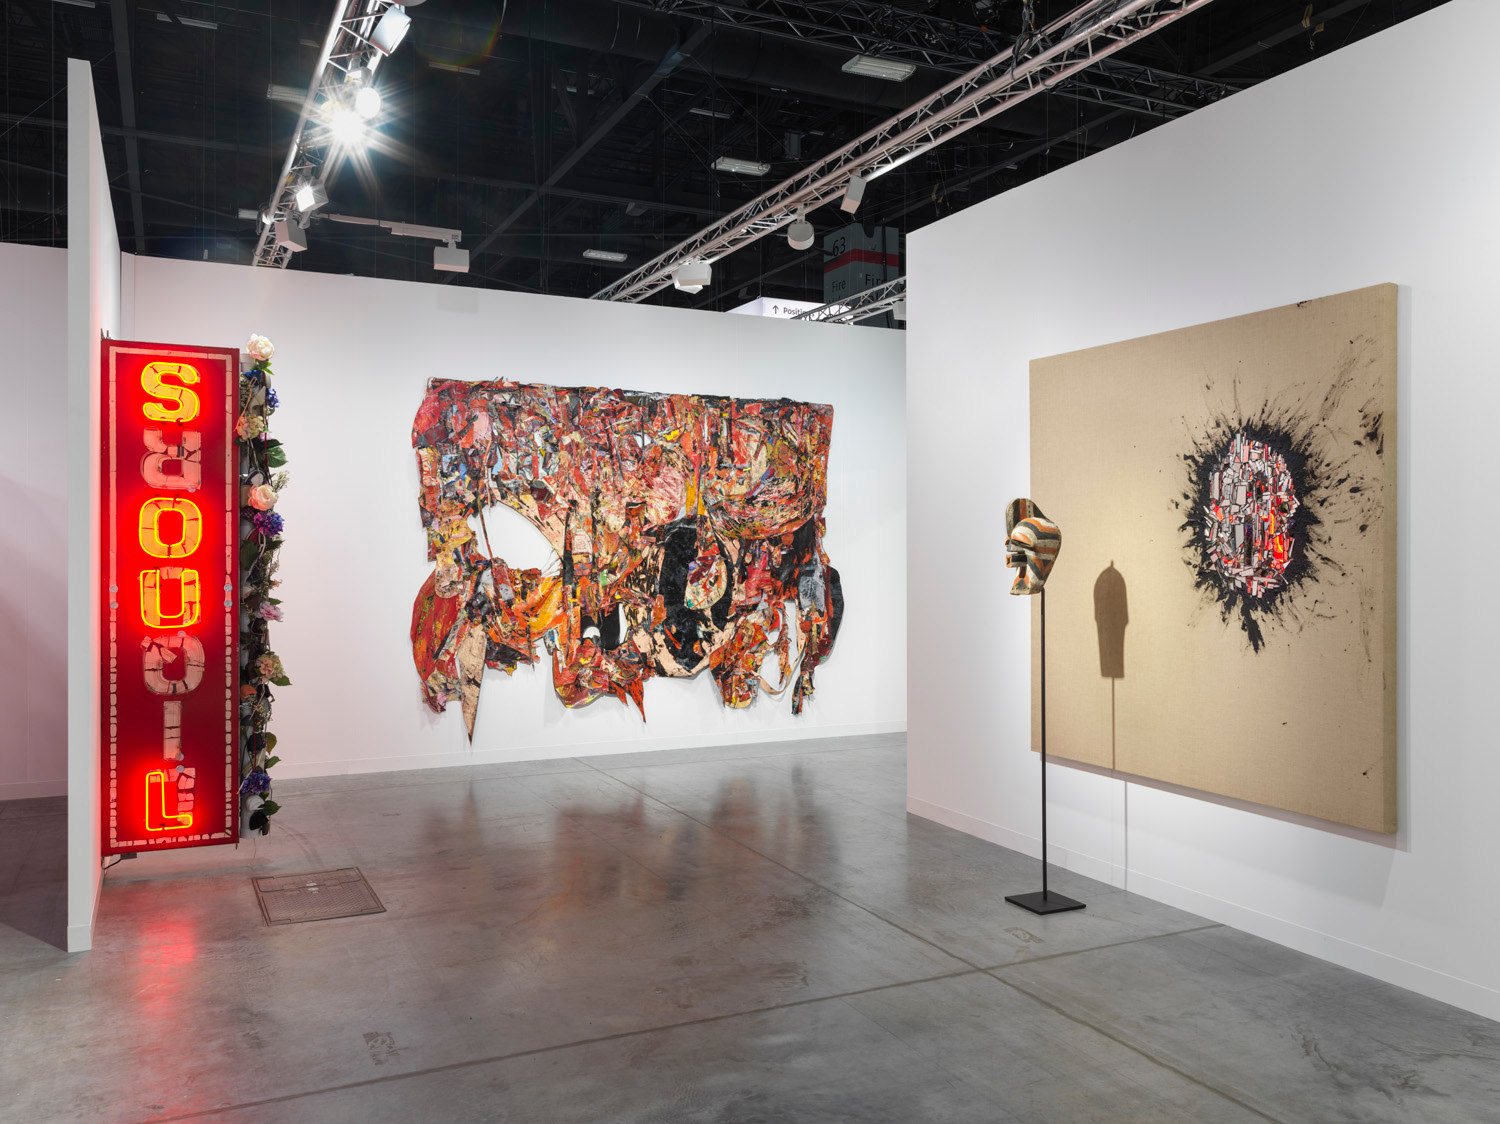 Installation view of Lehmann Maupin's booth at Art Basel Miami Beach 2018, view 3